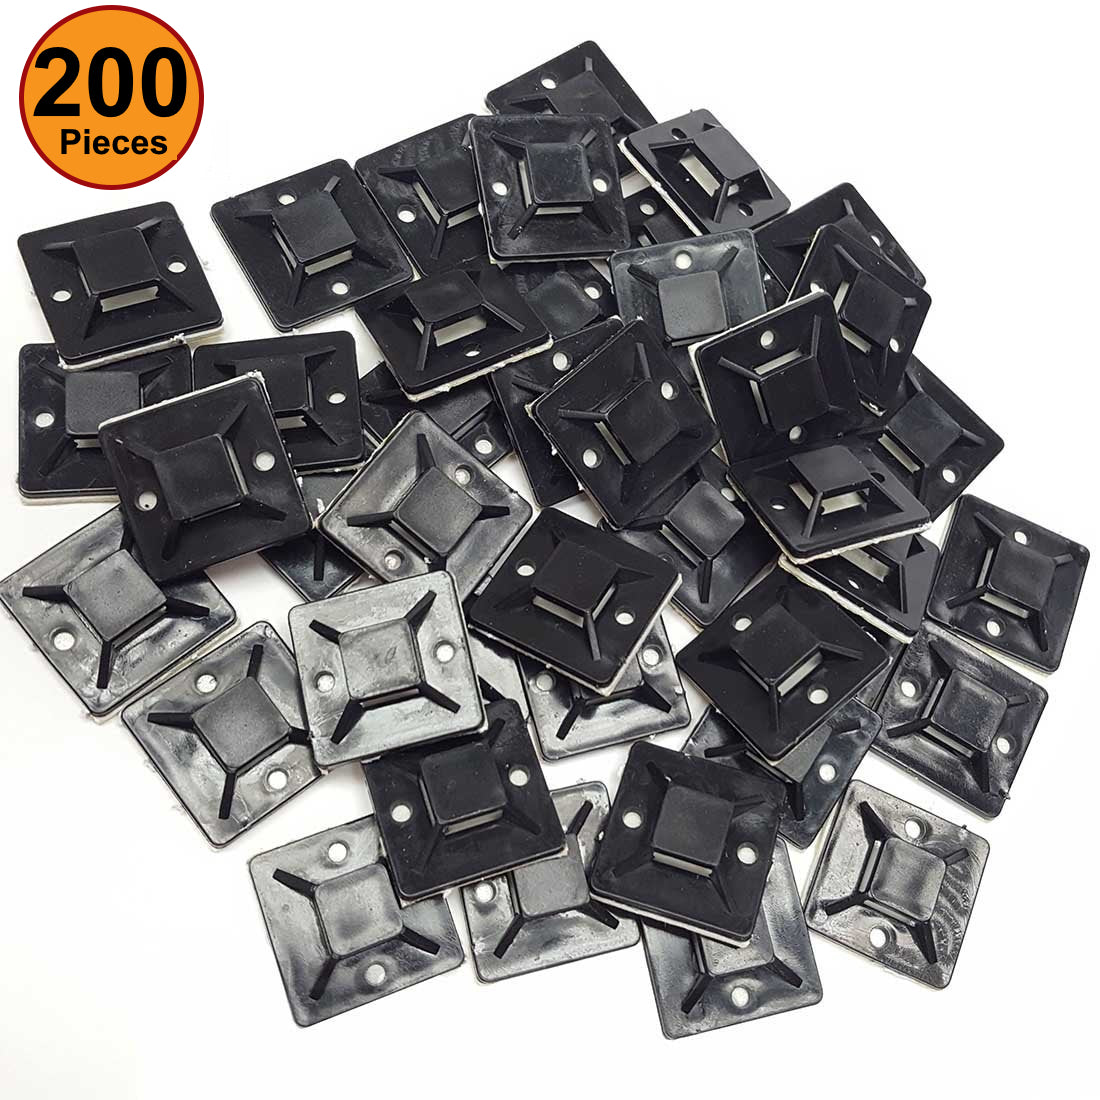 NiftyPlaza Cable Ties Mounts, Self ADHESIVE Clips Base Nylon, (20mm x 20mm) - 200 Black Cable Tie Mounts